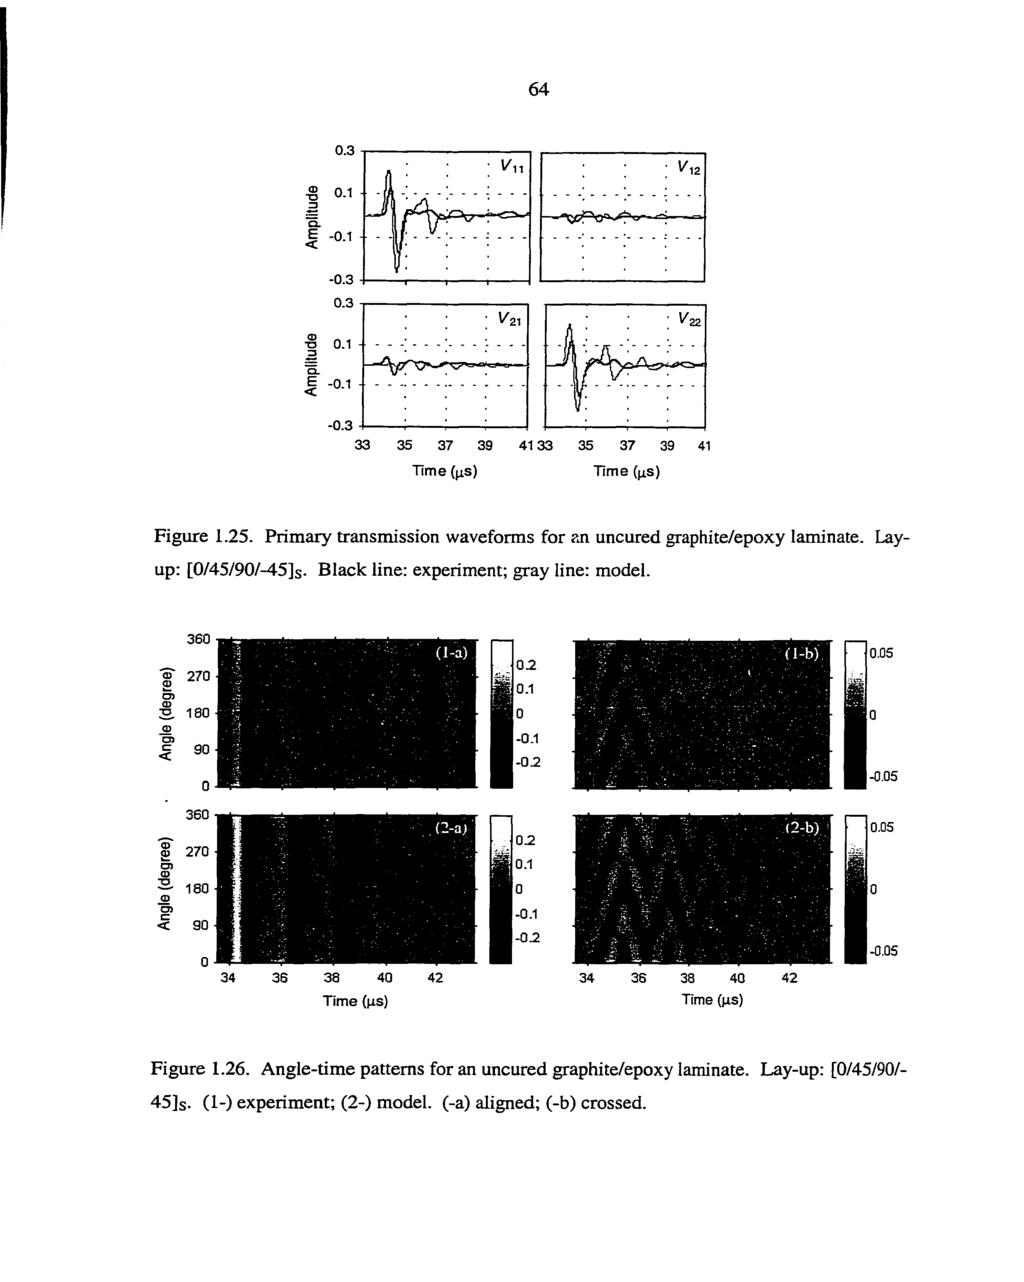 64 0.3 0.1 - -0.3 0.3-3 Q_ E -0.1 - -0.3 33 35 37 39 4133 35 37 39 41 Time (^s) Time (gs) Figure 1.25. Primary transmission waveforms for an uncured graphite/epoxy laminate.